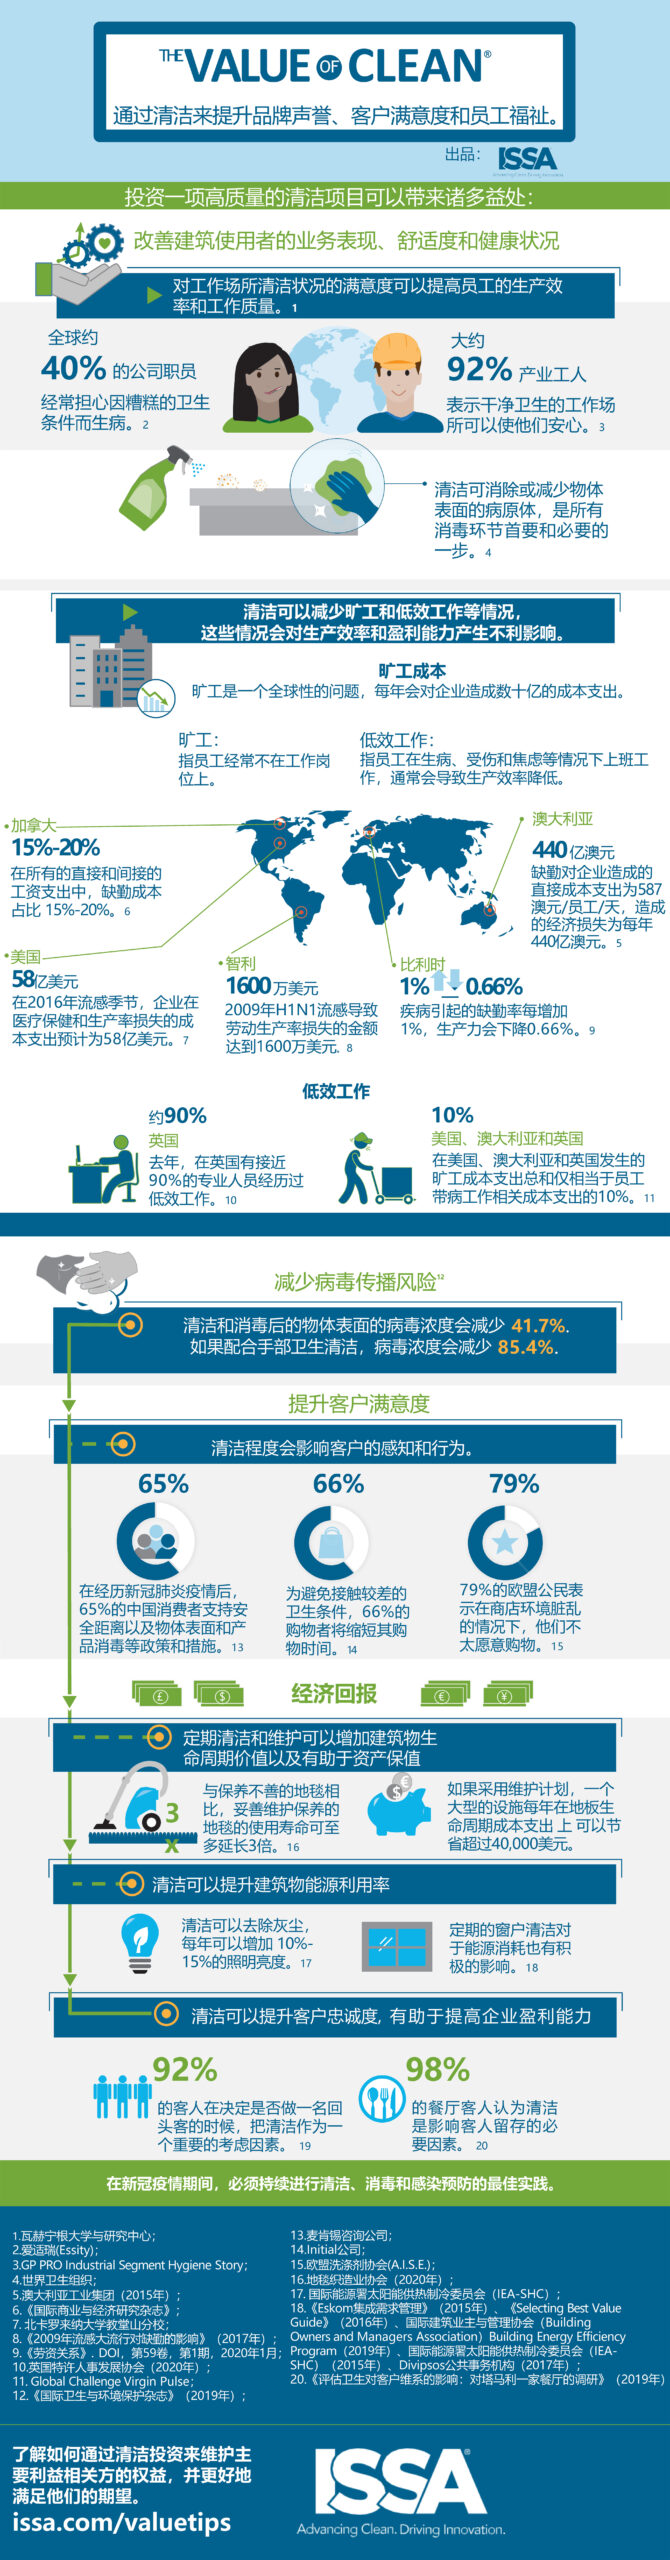 The Value of Clean®信息图表